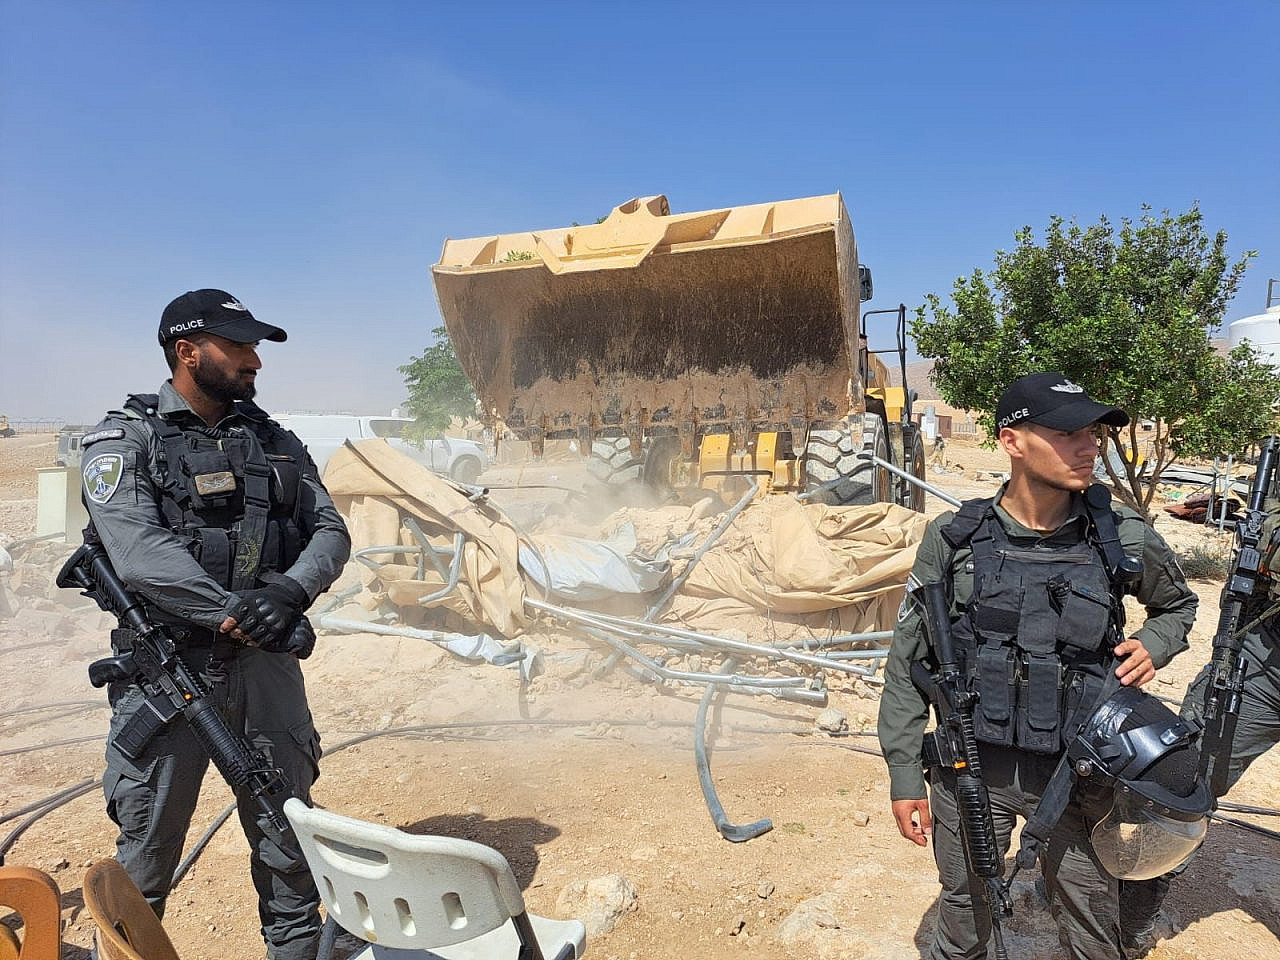 Israeli police stand in front of a bulldozer demolishing homes in Masafer Yatta in front of the occupied West Bank, June 1, 2022. (B'Tselem)